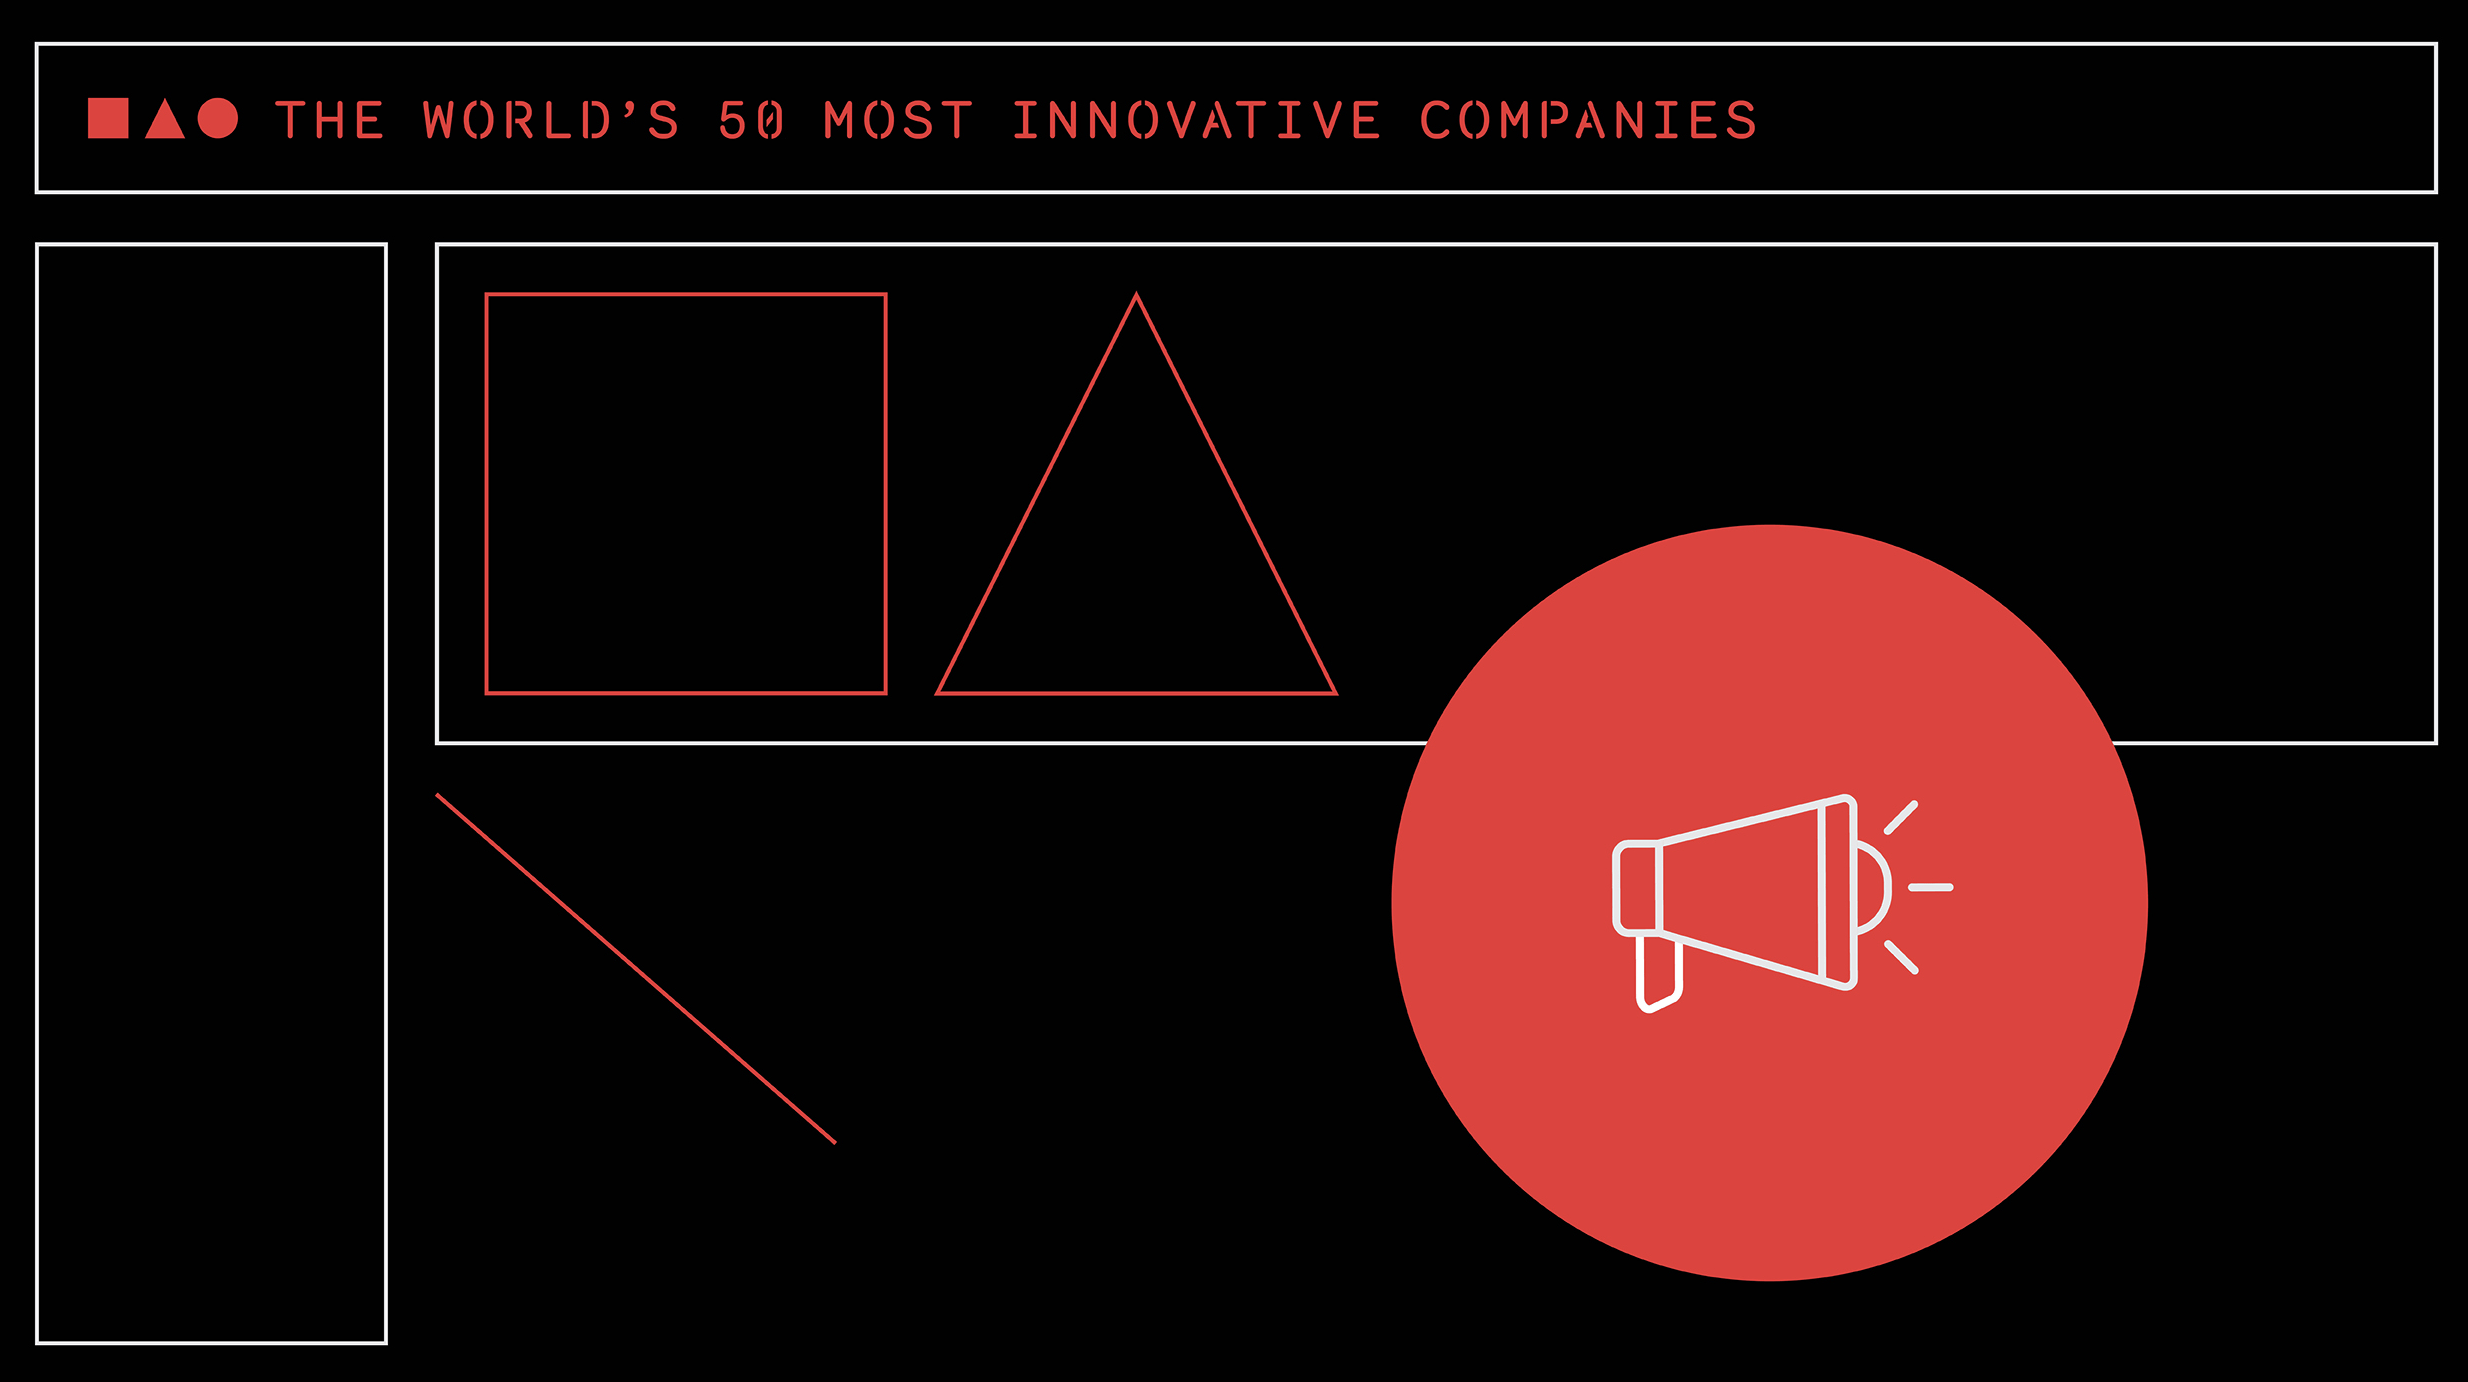 Photo illustration for Fast Company's "The World's 50 Most Innovative Companies"